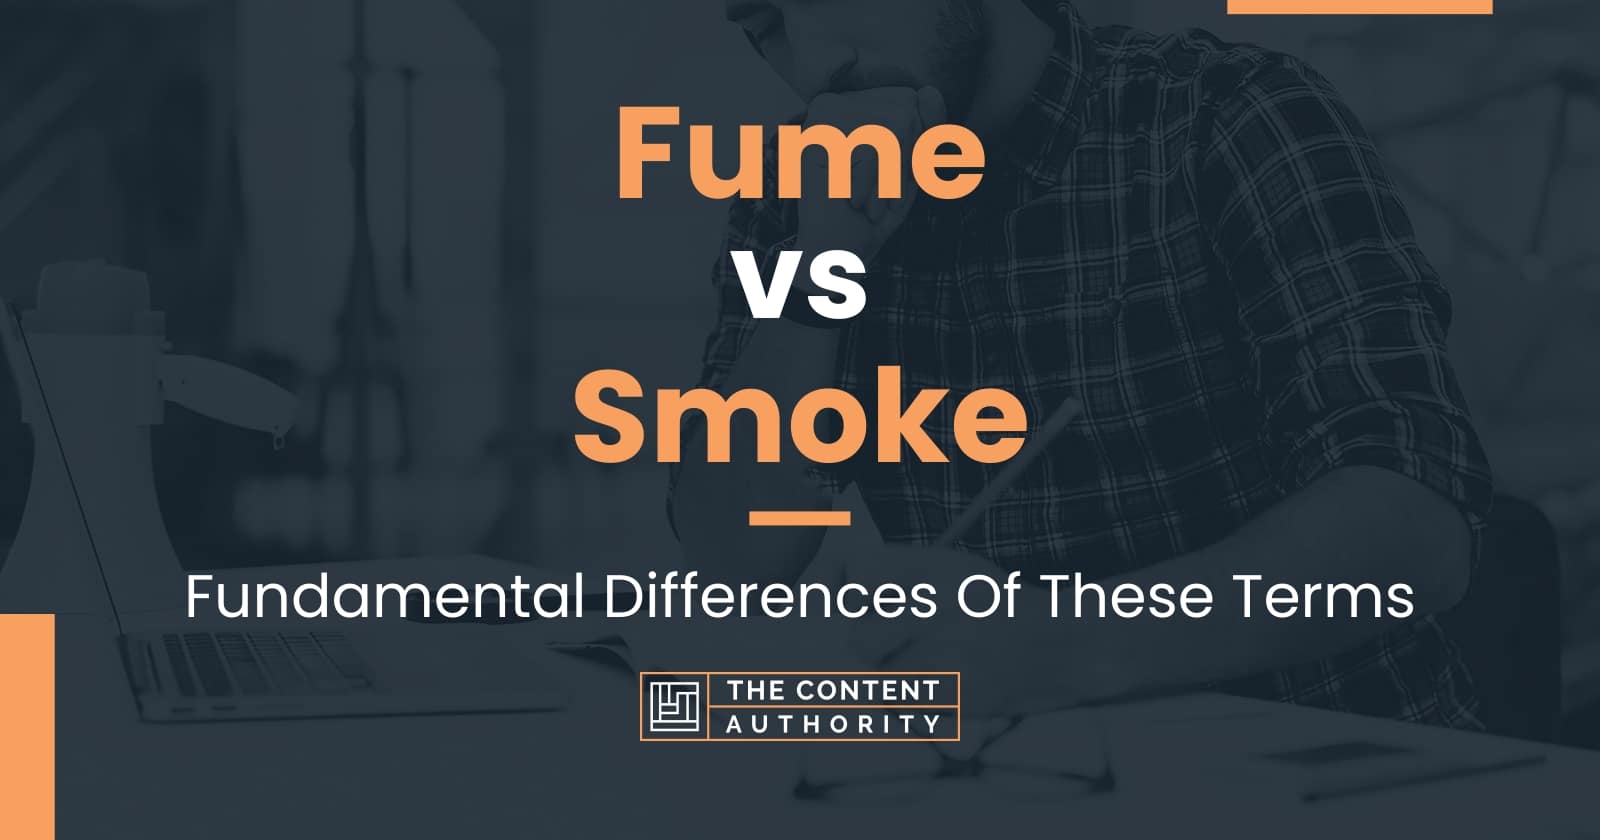 Fume vs Smoke: Fundamental Differences Of These Terms